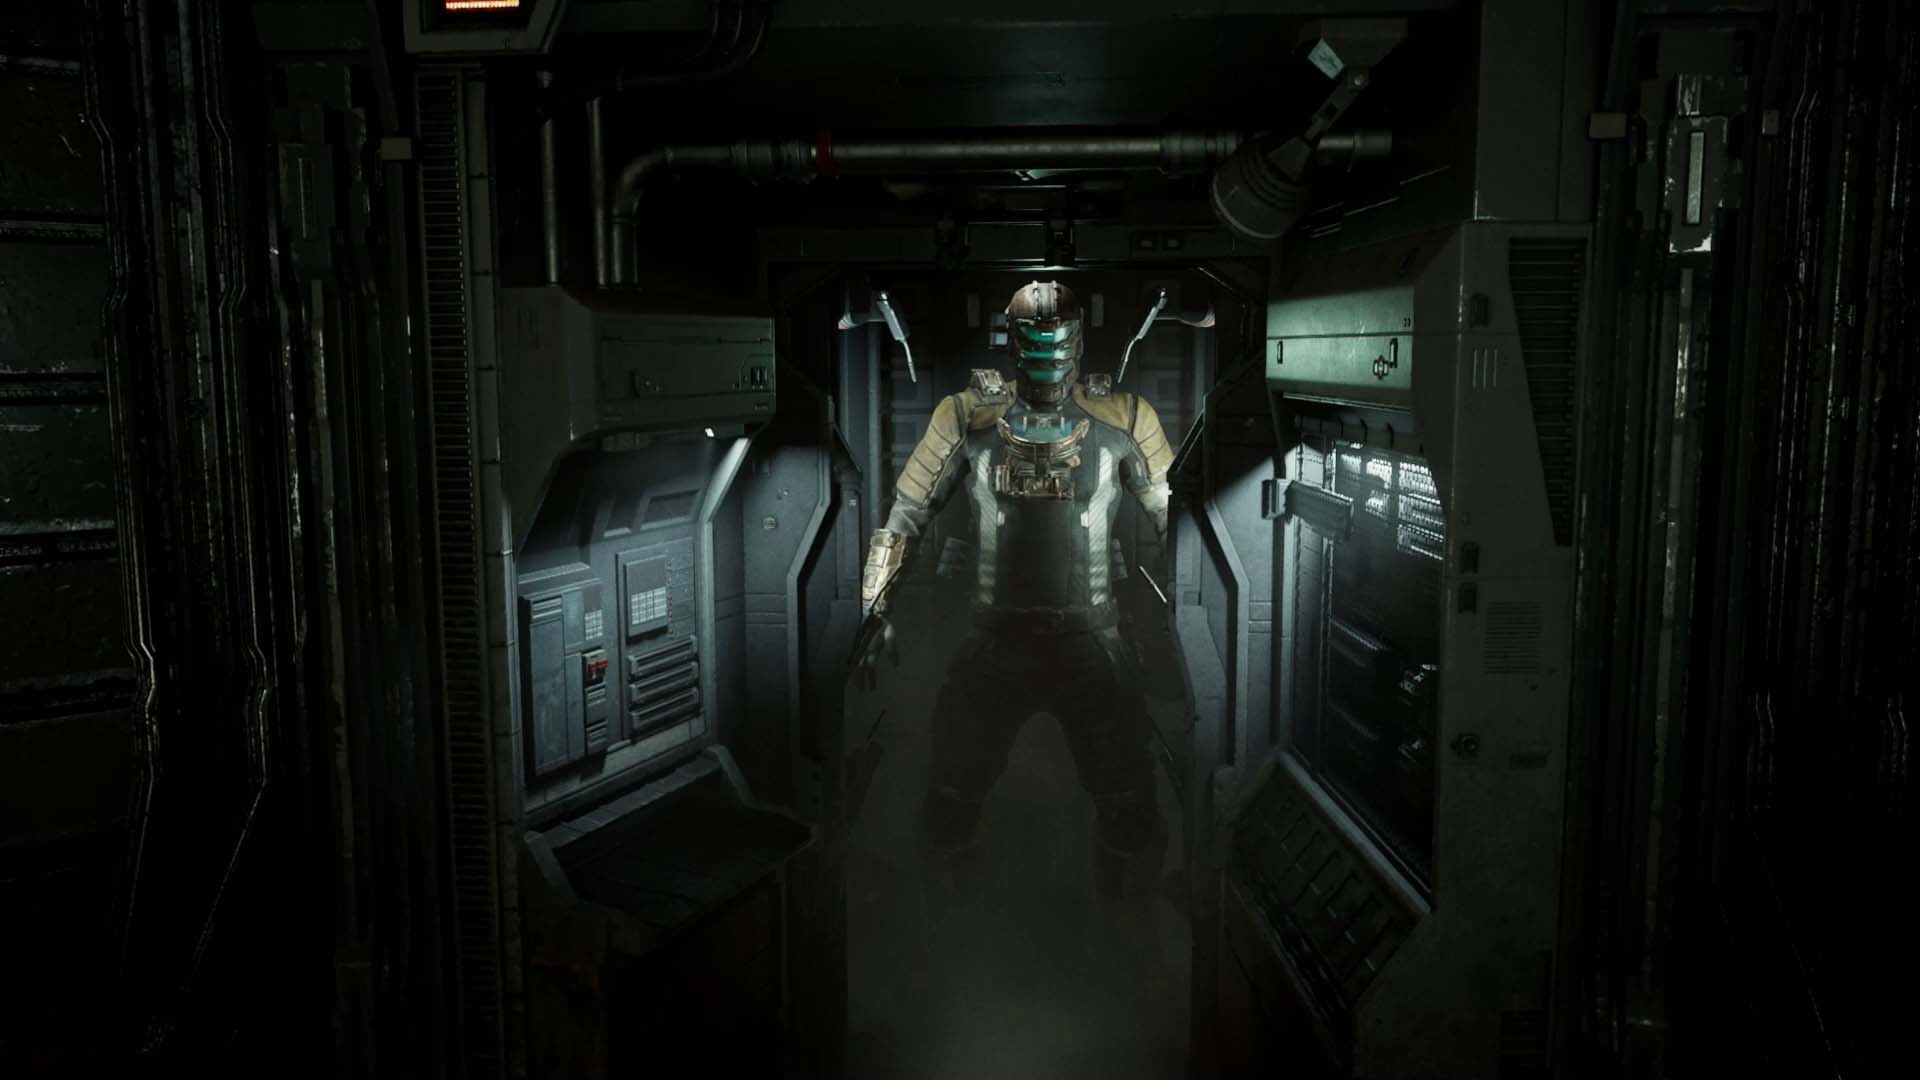 Dead Space remake pre-orders on Steam come with a free copy of Dead Space 2